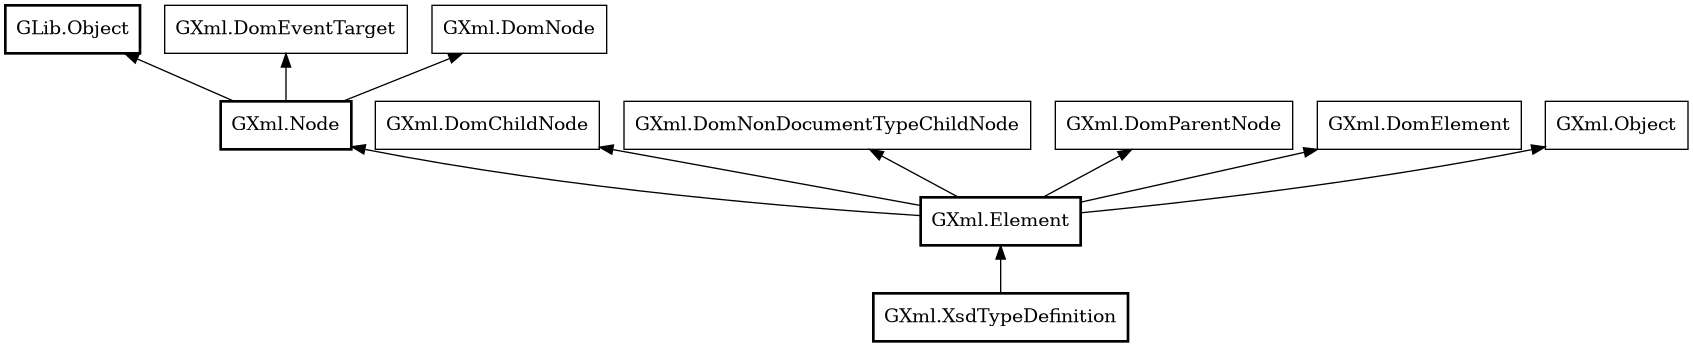 Object hierarchy for XsdTypeDefinition